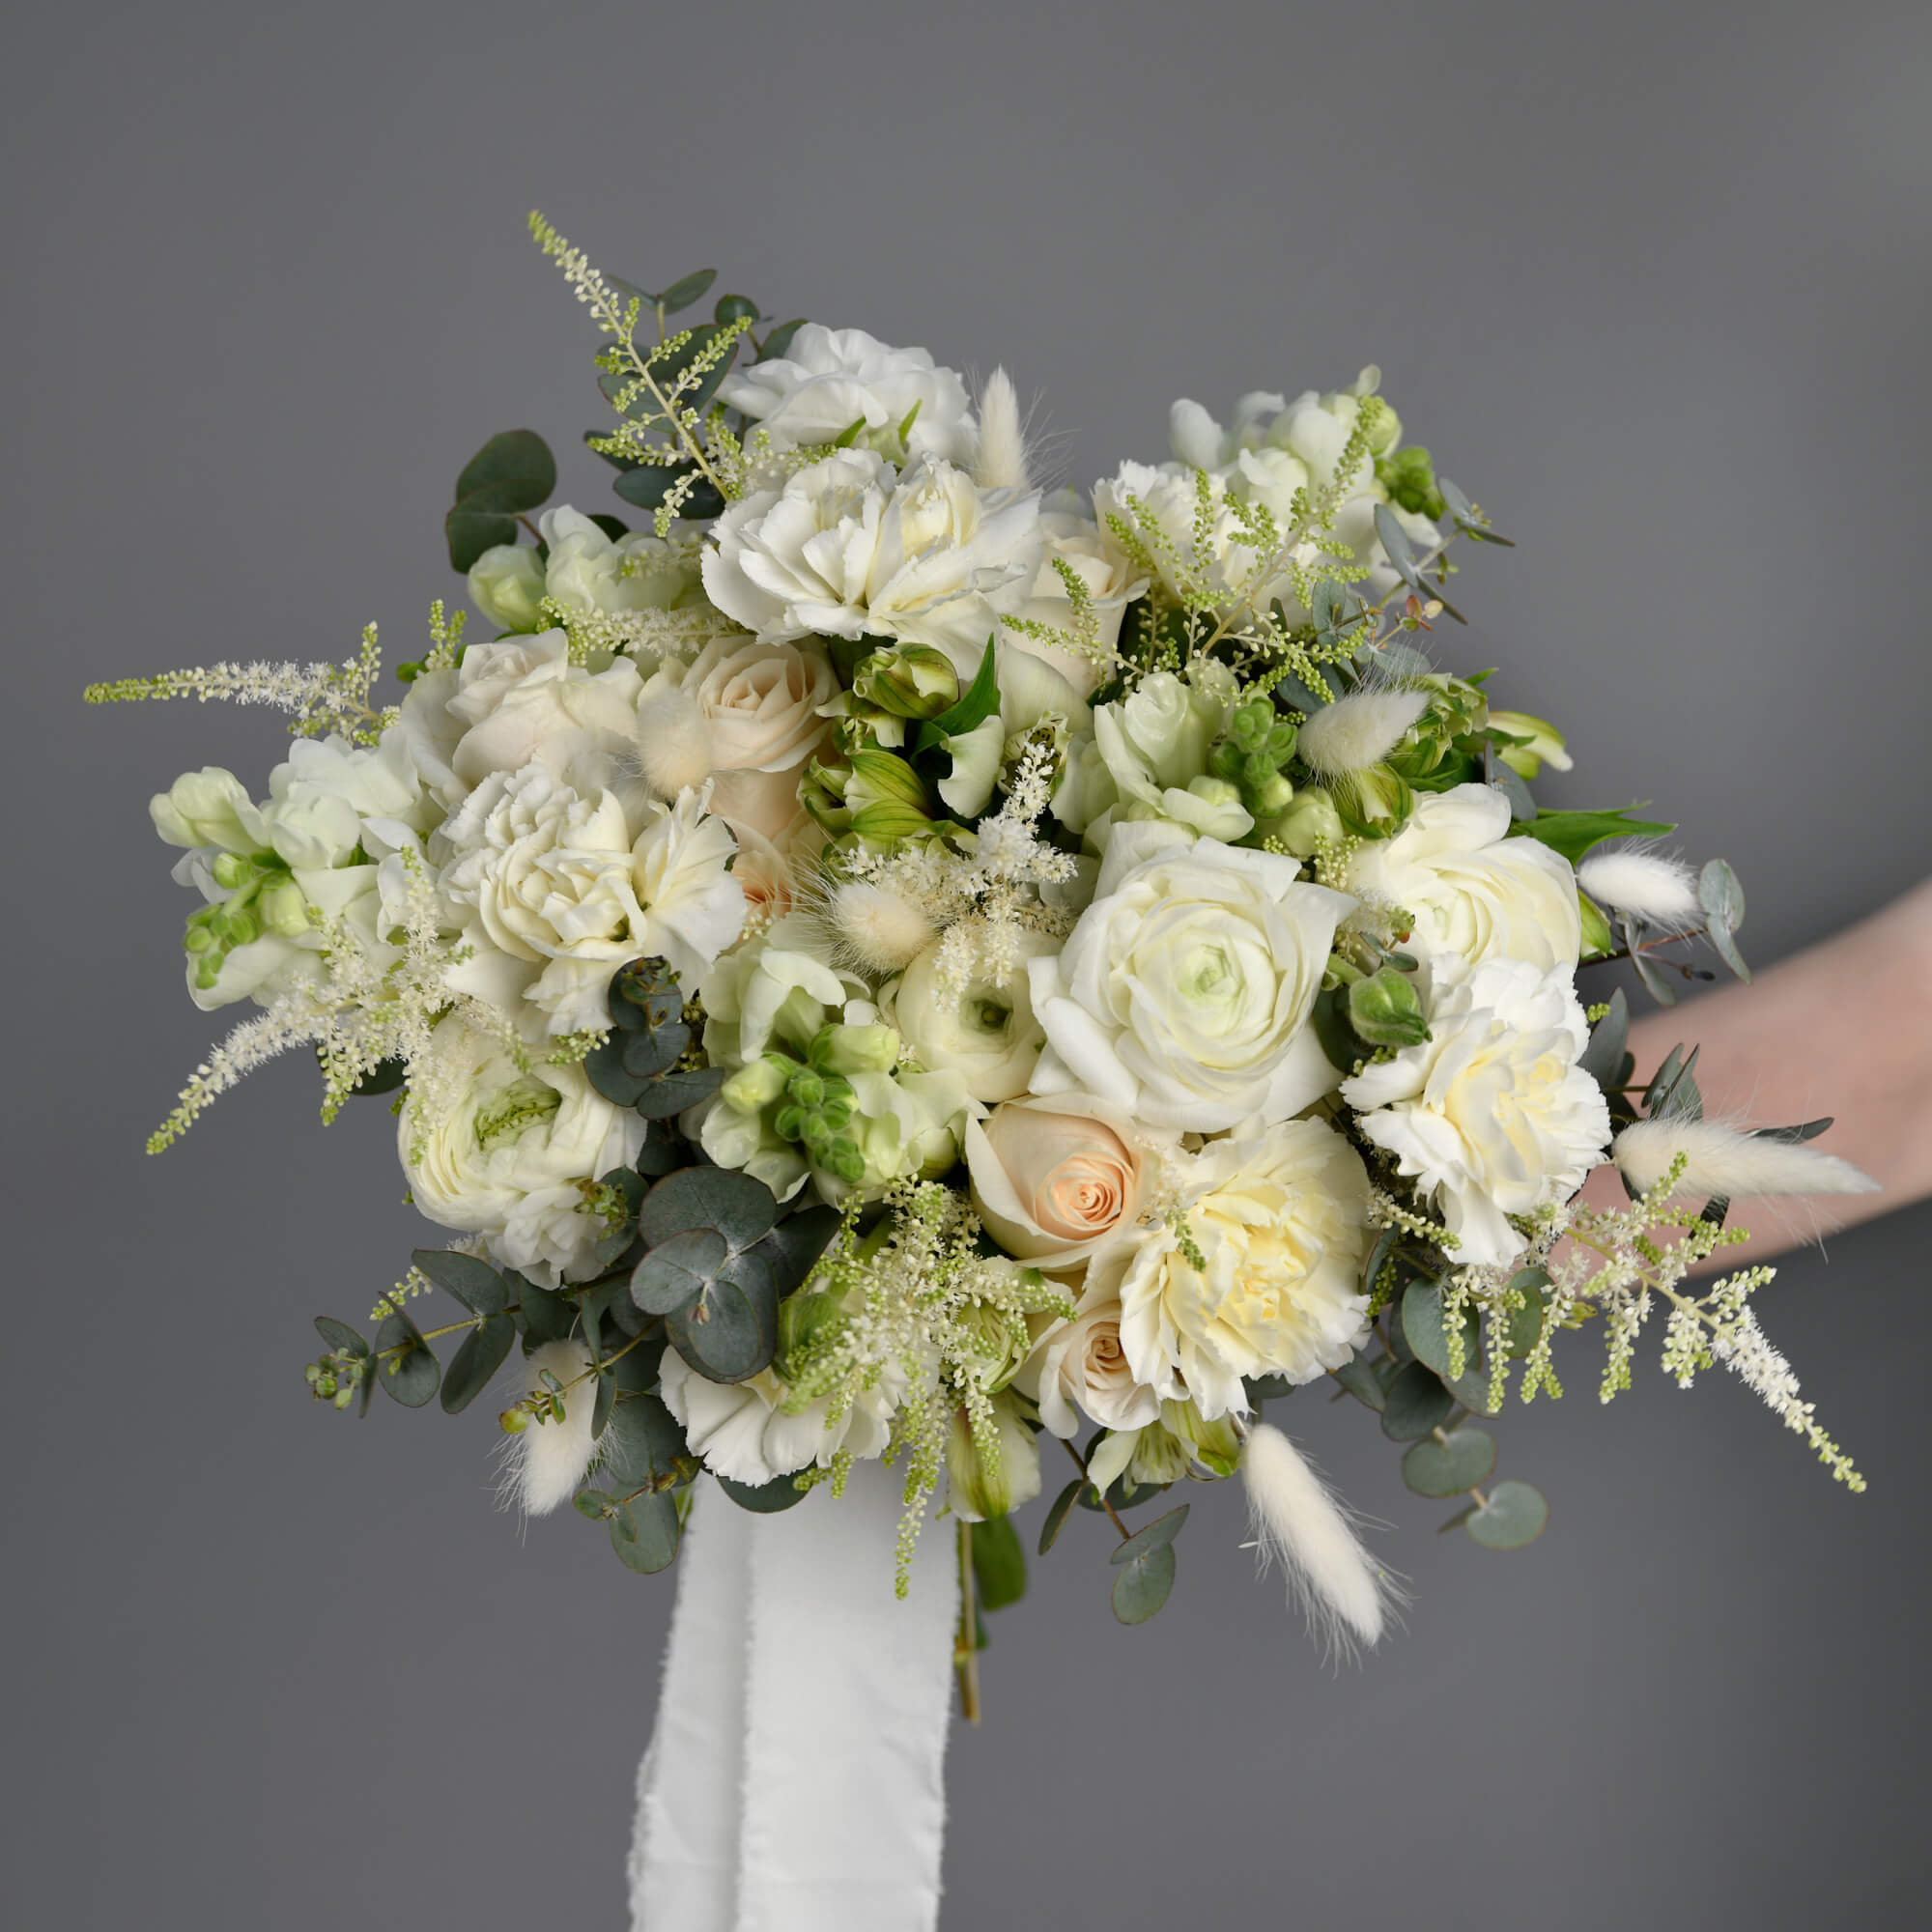 Bridal bouquet with ranunculus and astilbe